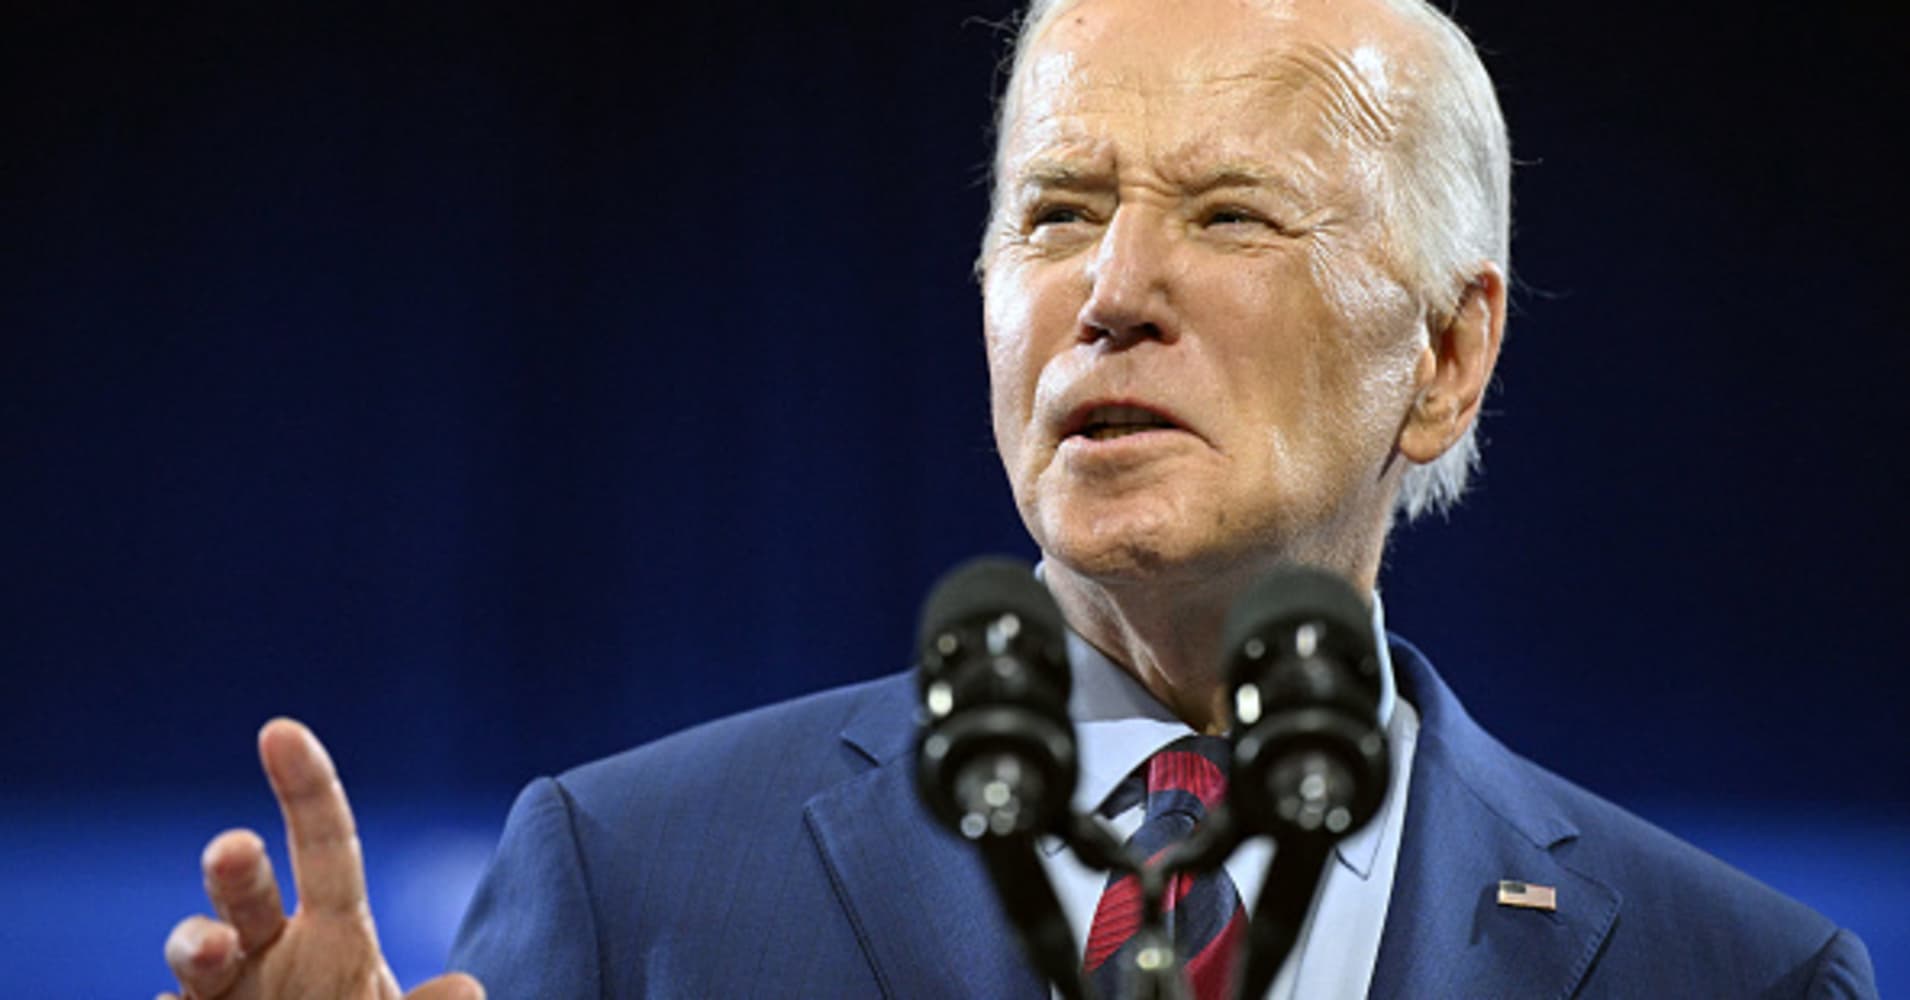 biden set to meet with executives from citi, united airlines, marriott and others